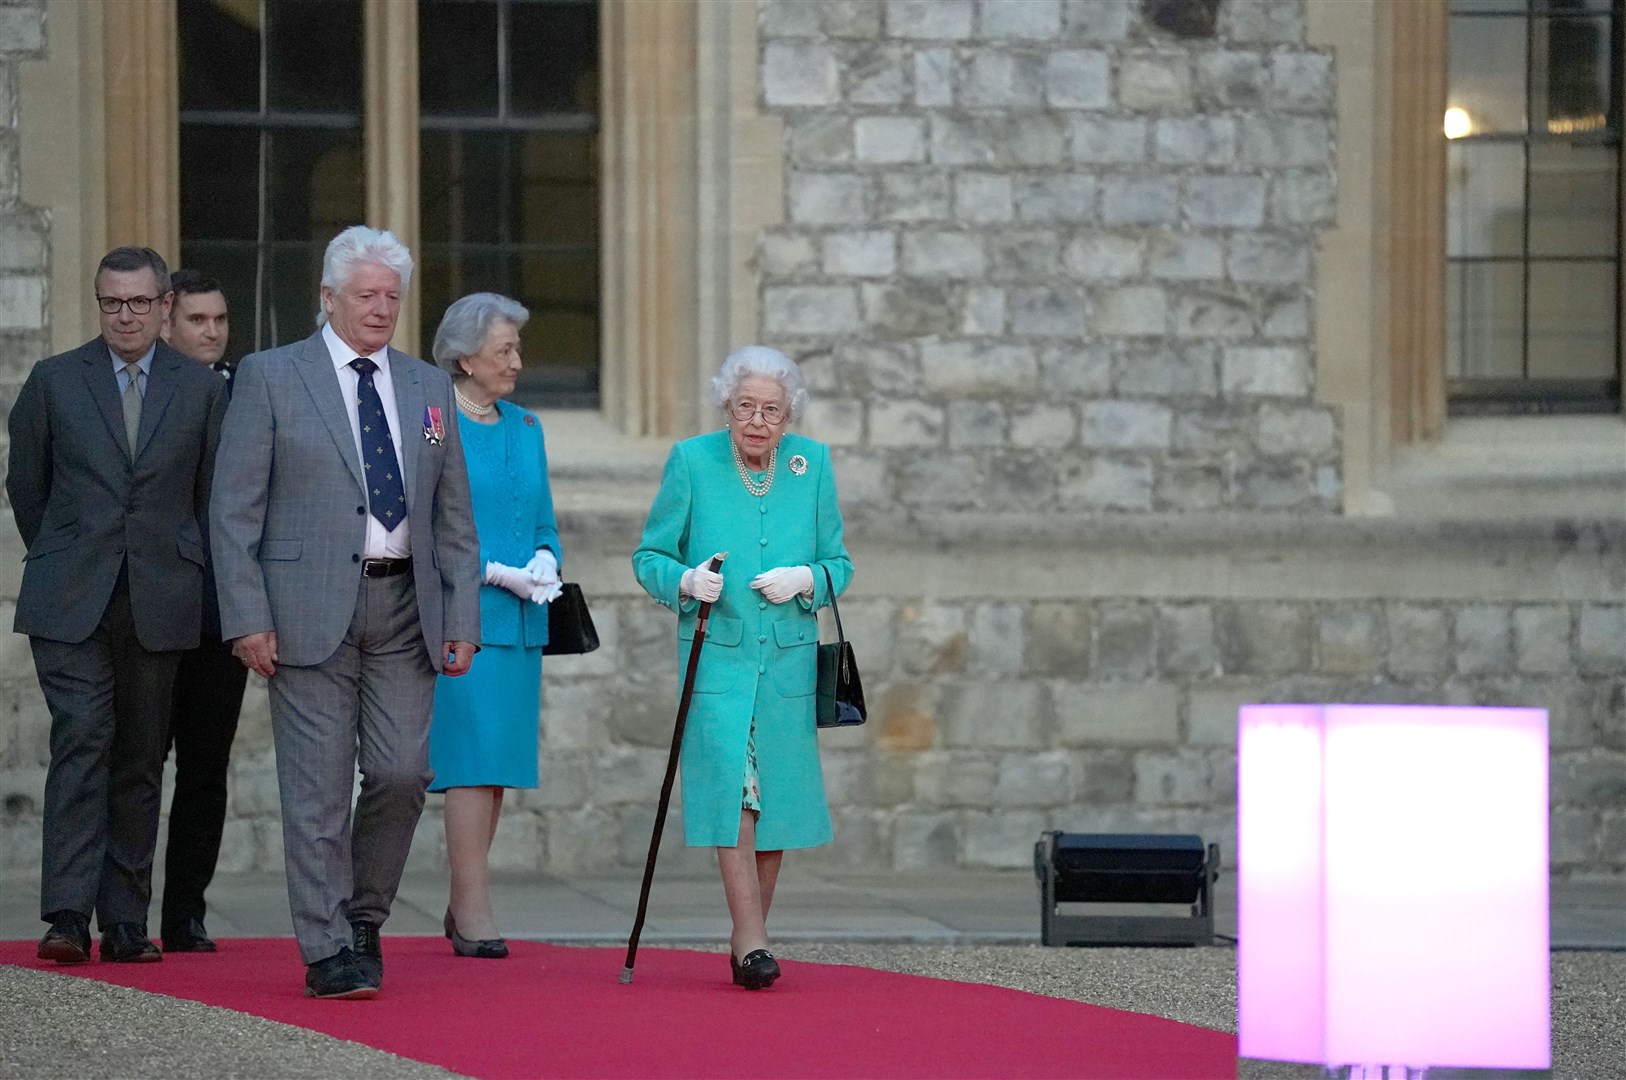 The Queen symbolically lead the lighting of the principal Jubilee beacon at Windsor Castle (Steve Parsons/PA)